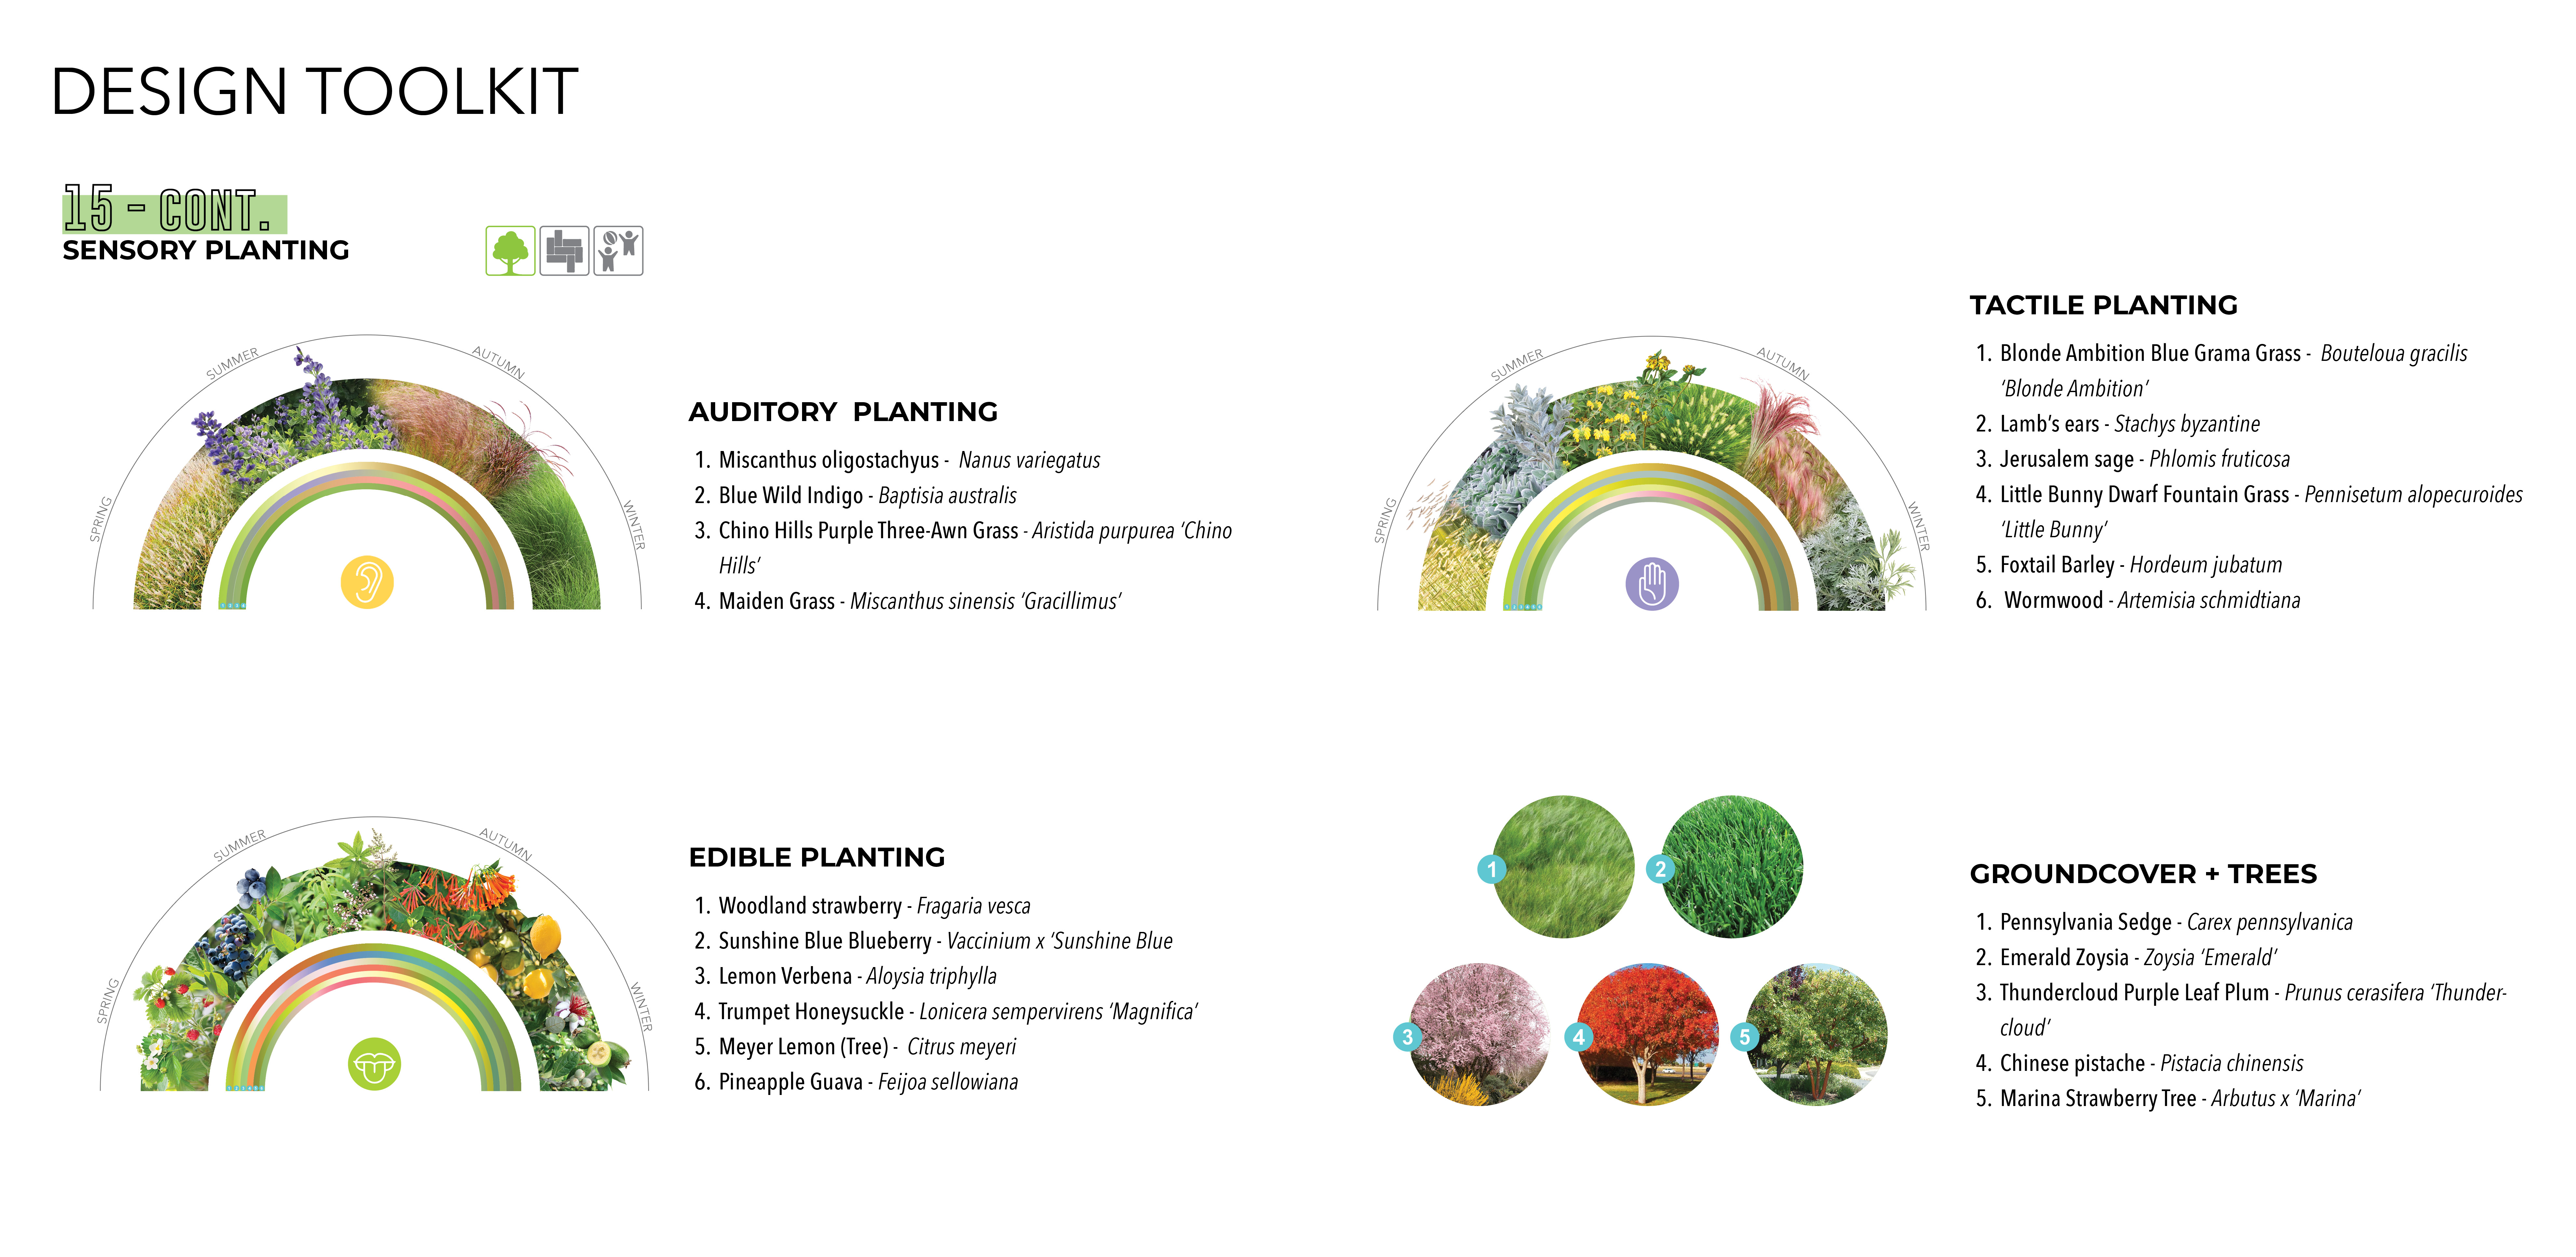 Sensory Planting Guide (Auditory, Tactile, Edible, and Groundcover + Trees)